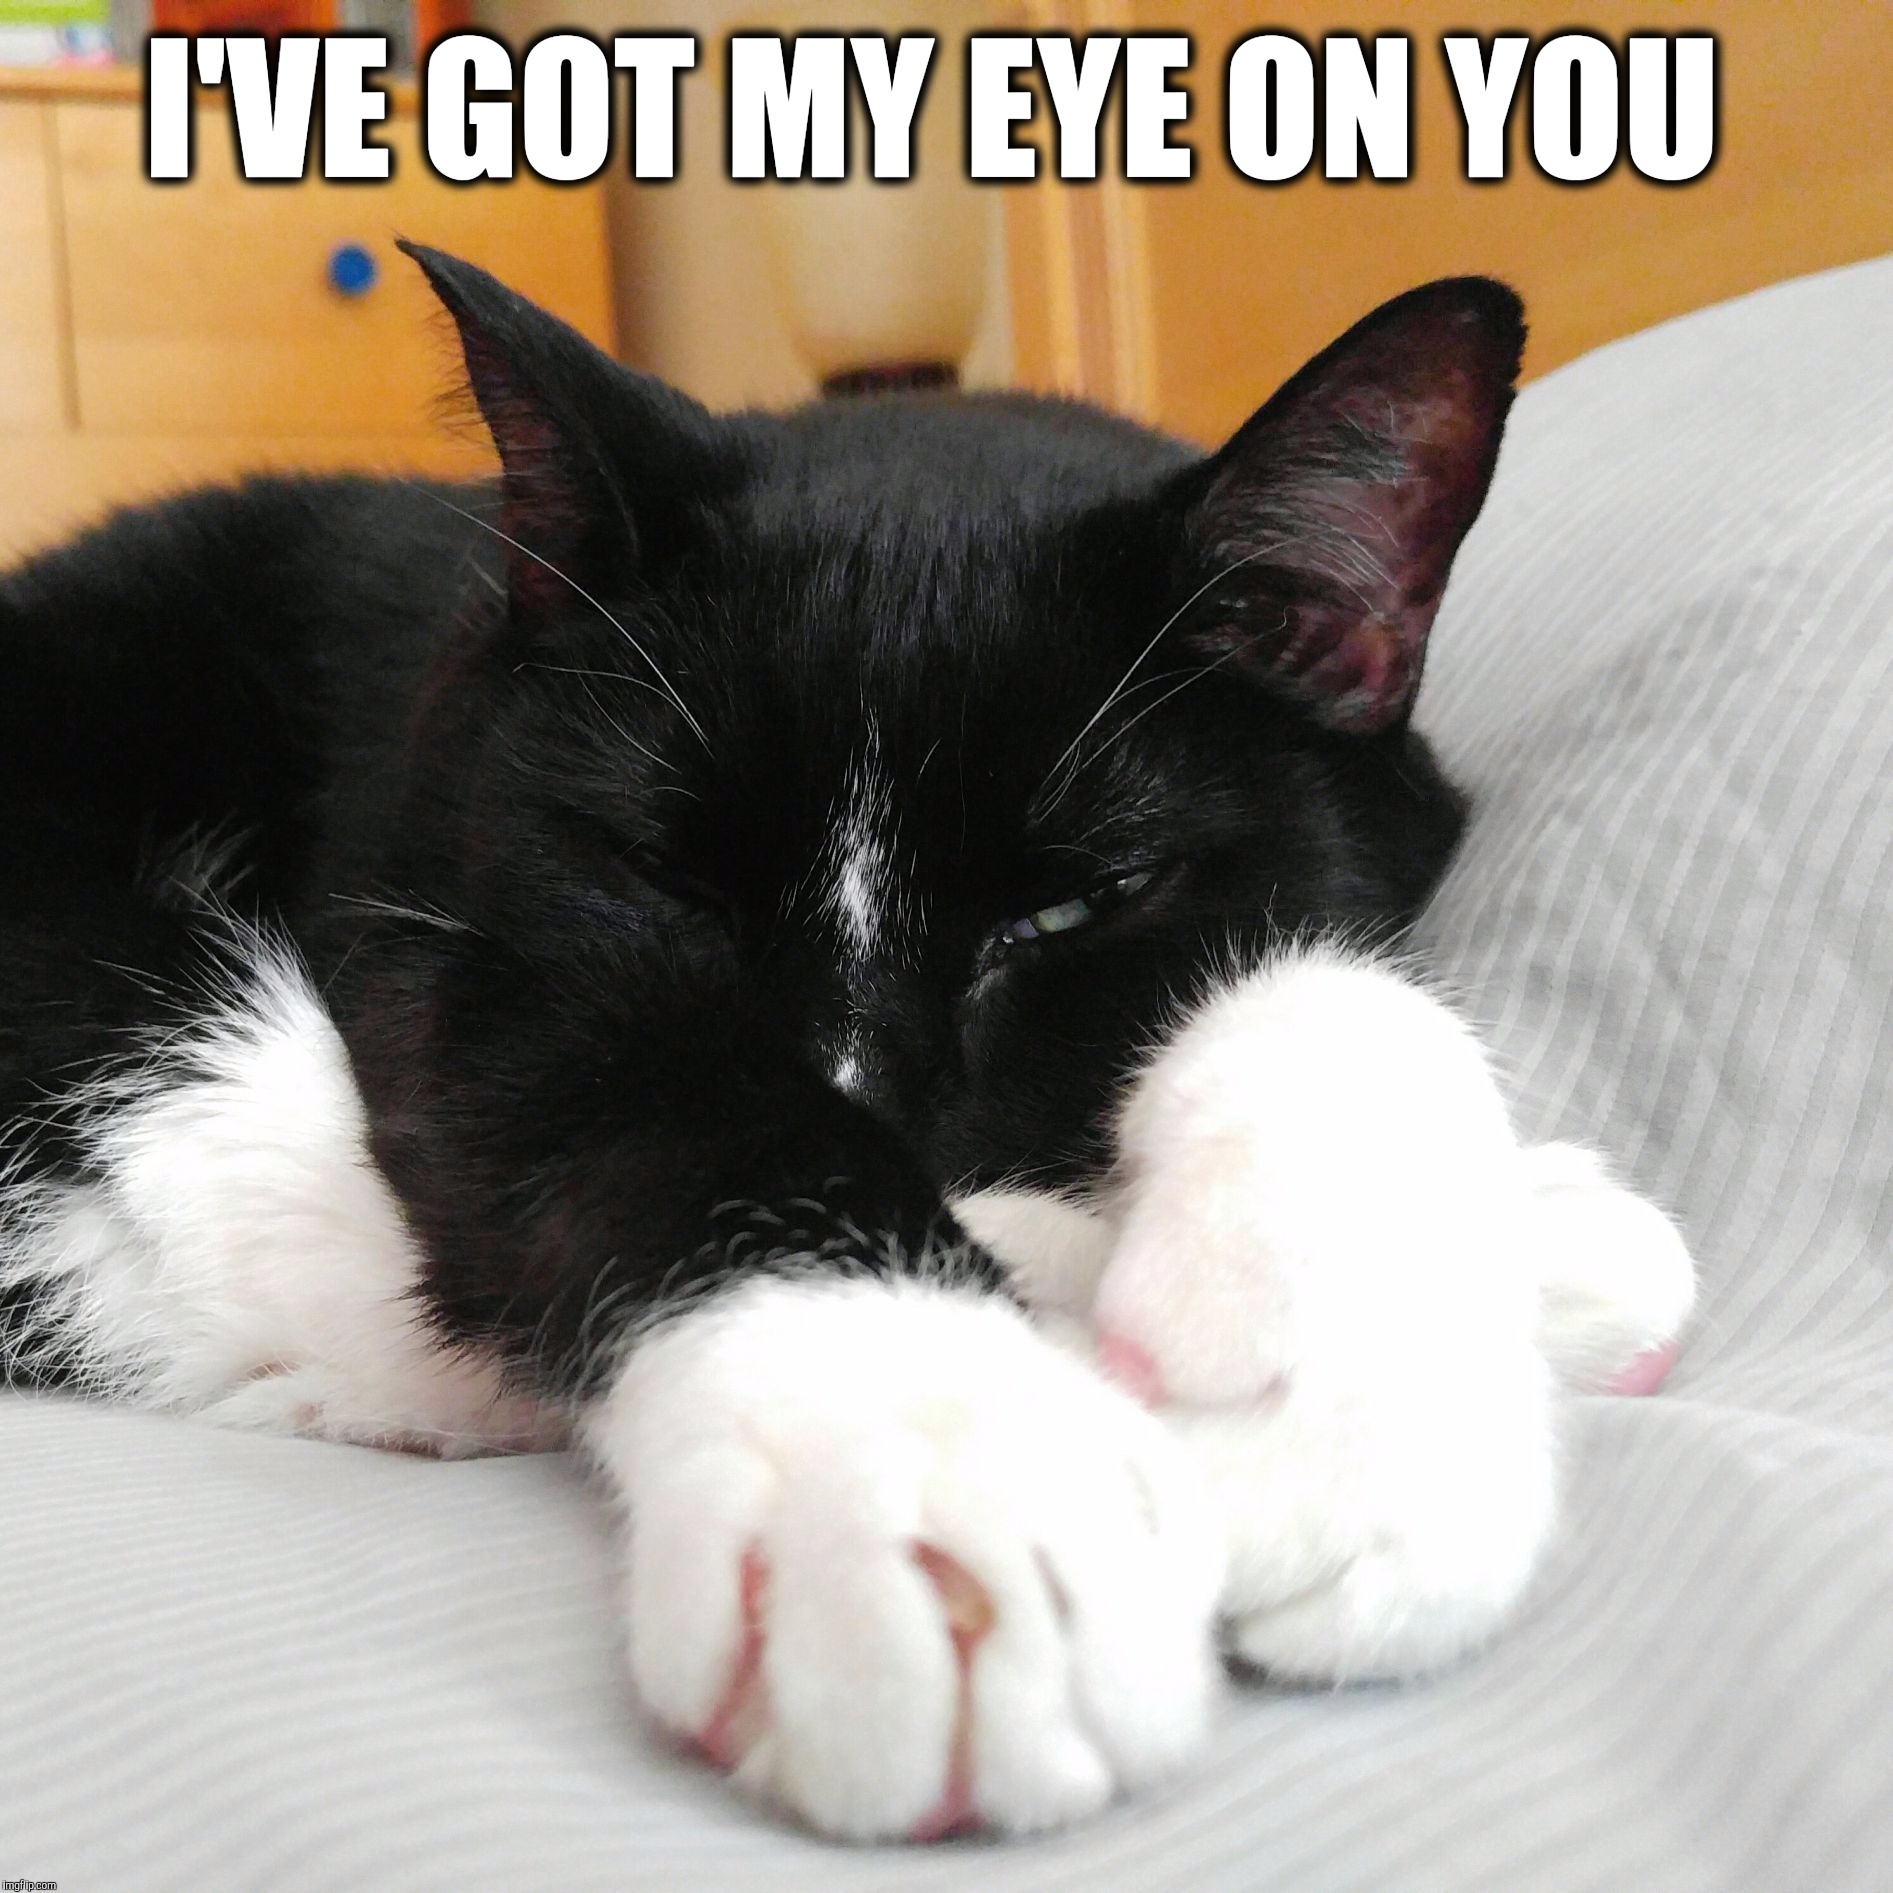 I've got my eye on you  |  I'VE GOT MY EYE ON YOU | image tagged in bert the cat,eye,funny cats,funny cat memes,cat memes,cat | made w/ Imgflip meme maker